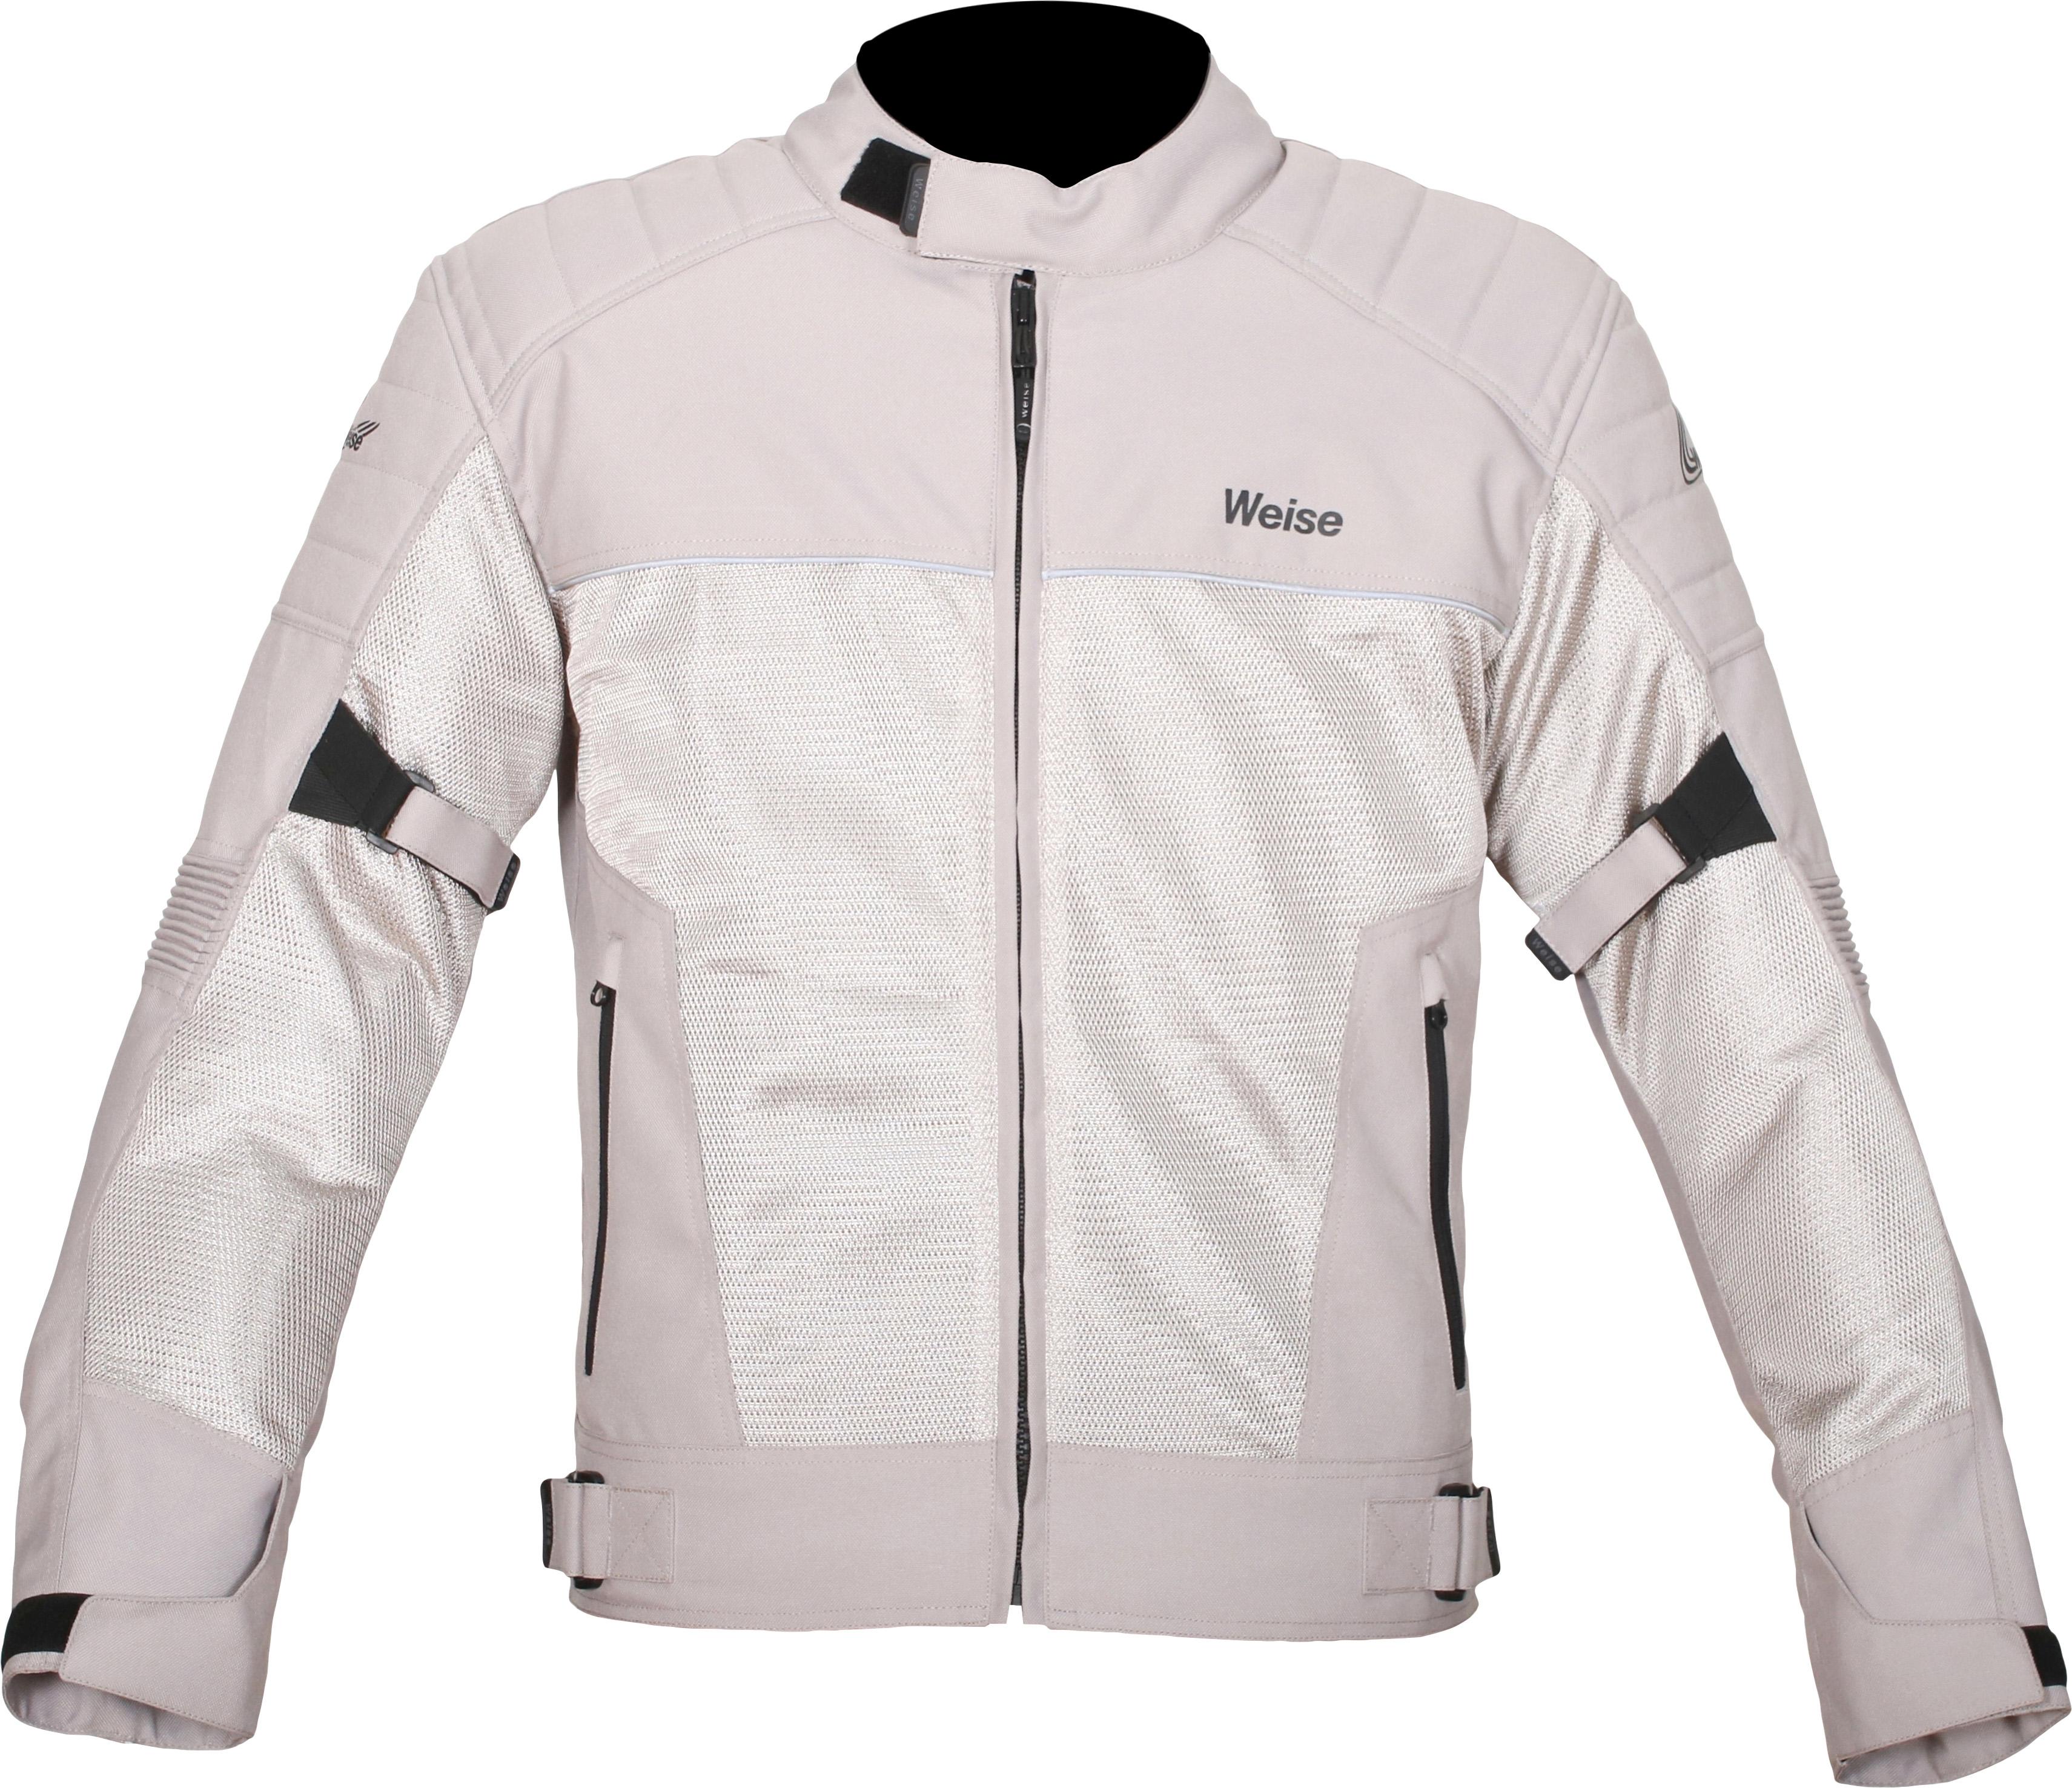 Weise Scout Motorcycle Jacket - Stone, M